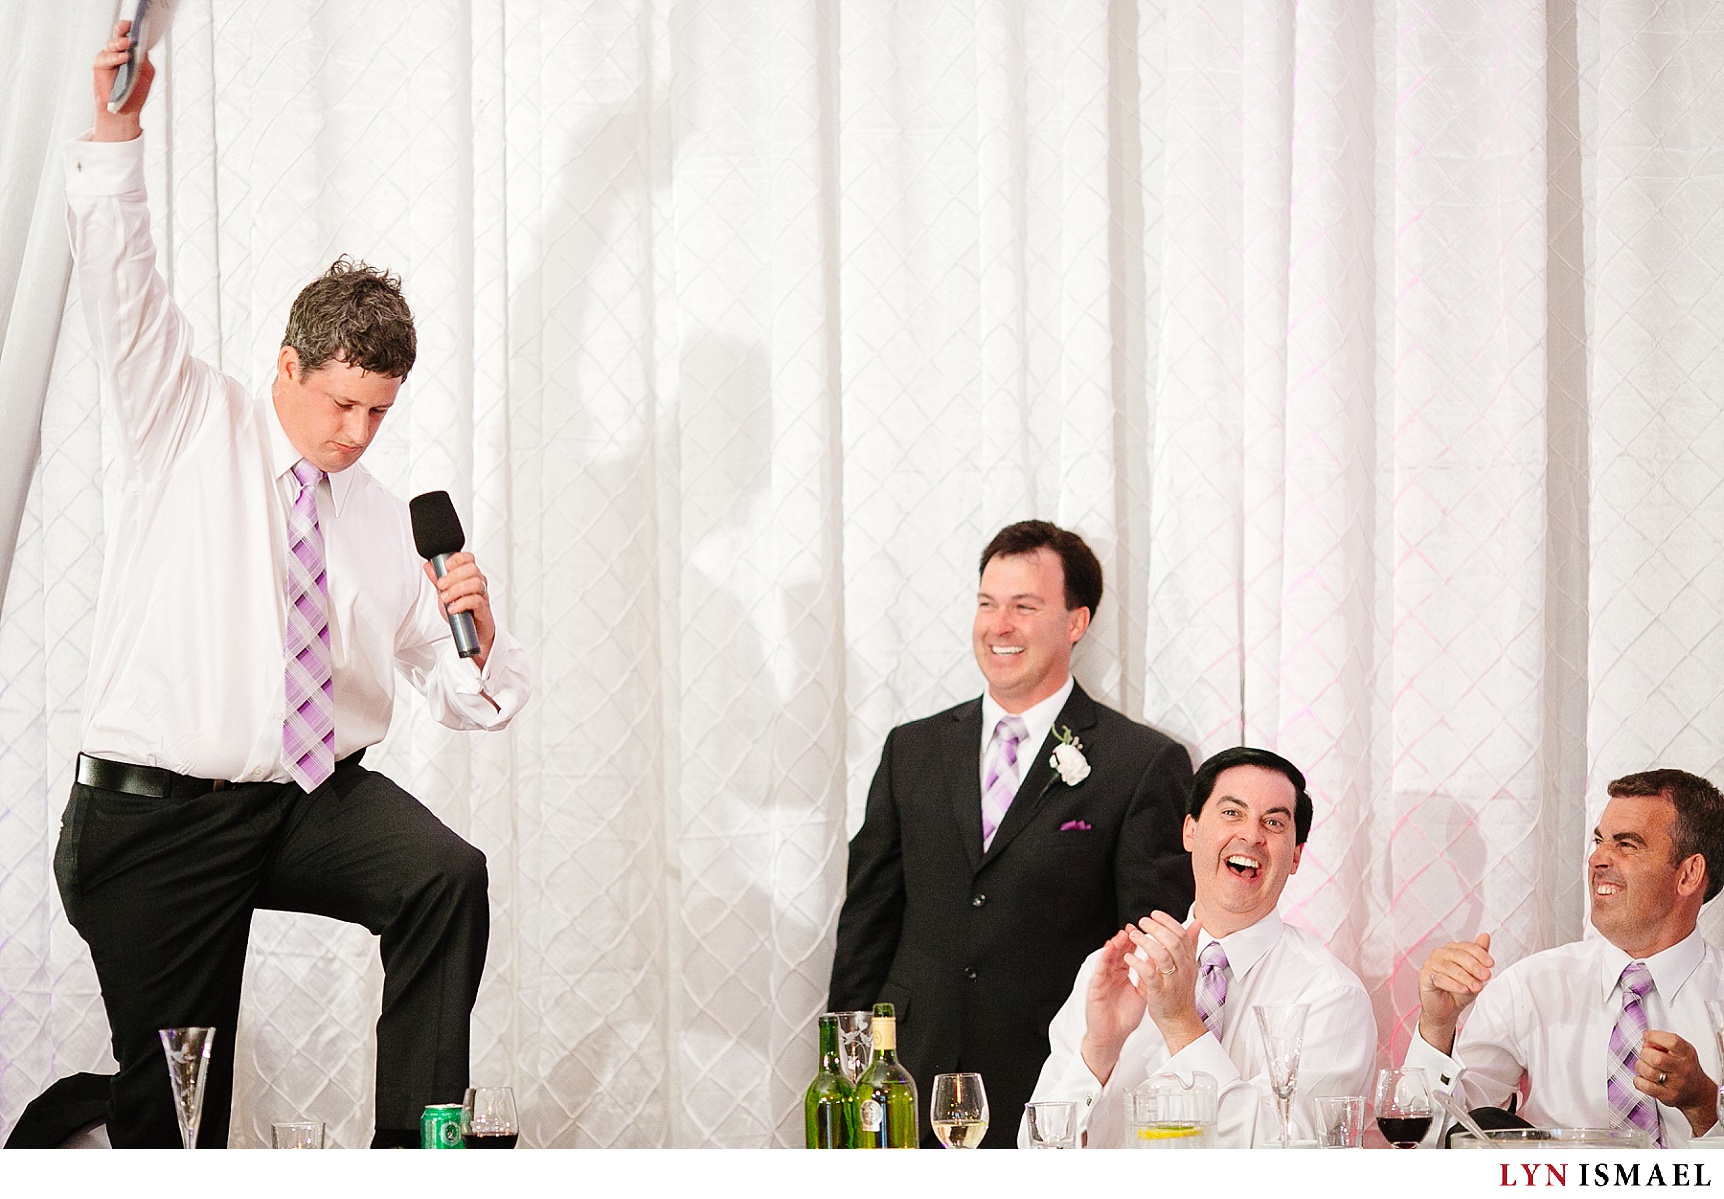 A hilarious moment at a wedding reception at the Croatian Hall in Kitchener.